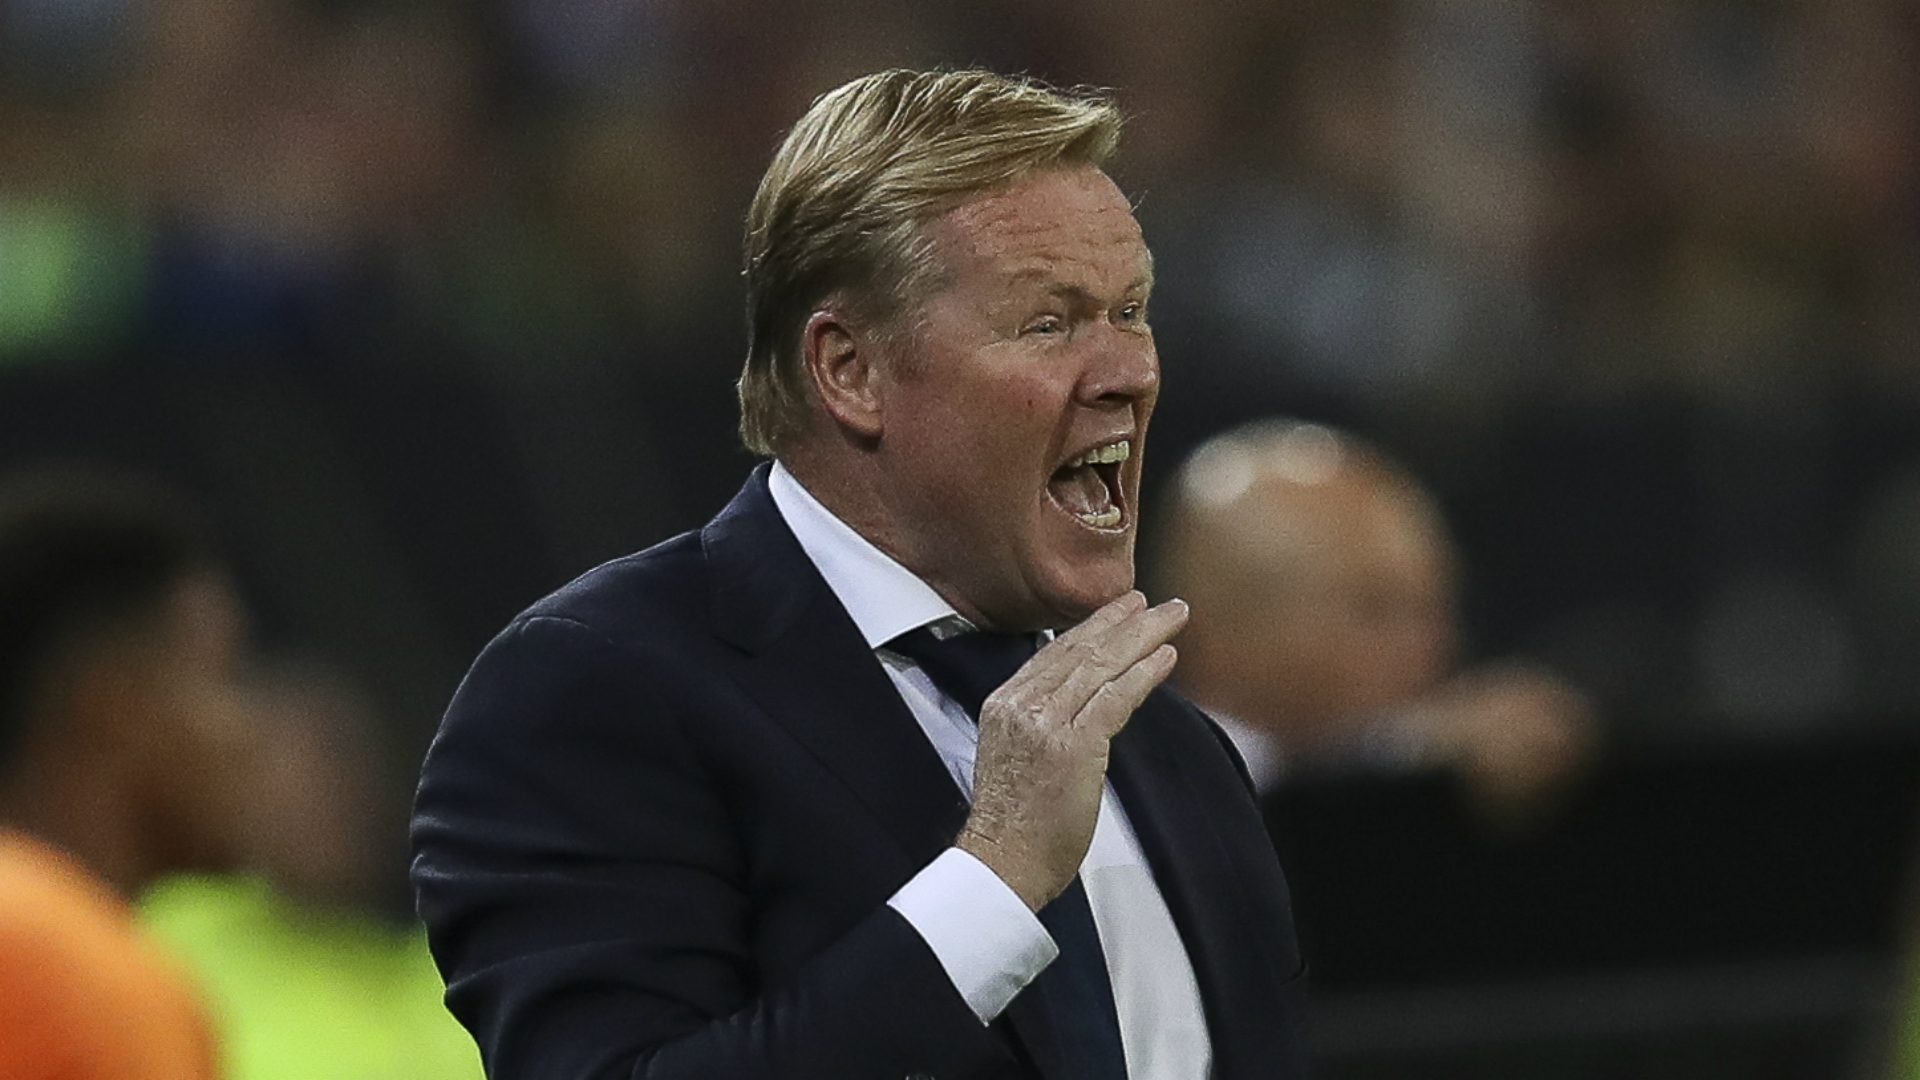 Netherlands can go joint-top of Euro 2020 qualifying Group C by beating Northern Ireland, but Ronald Koeman foresees a tough contest.